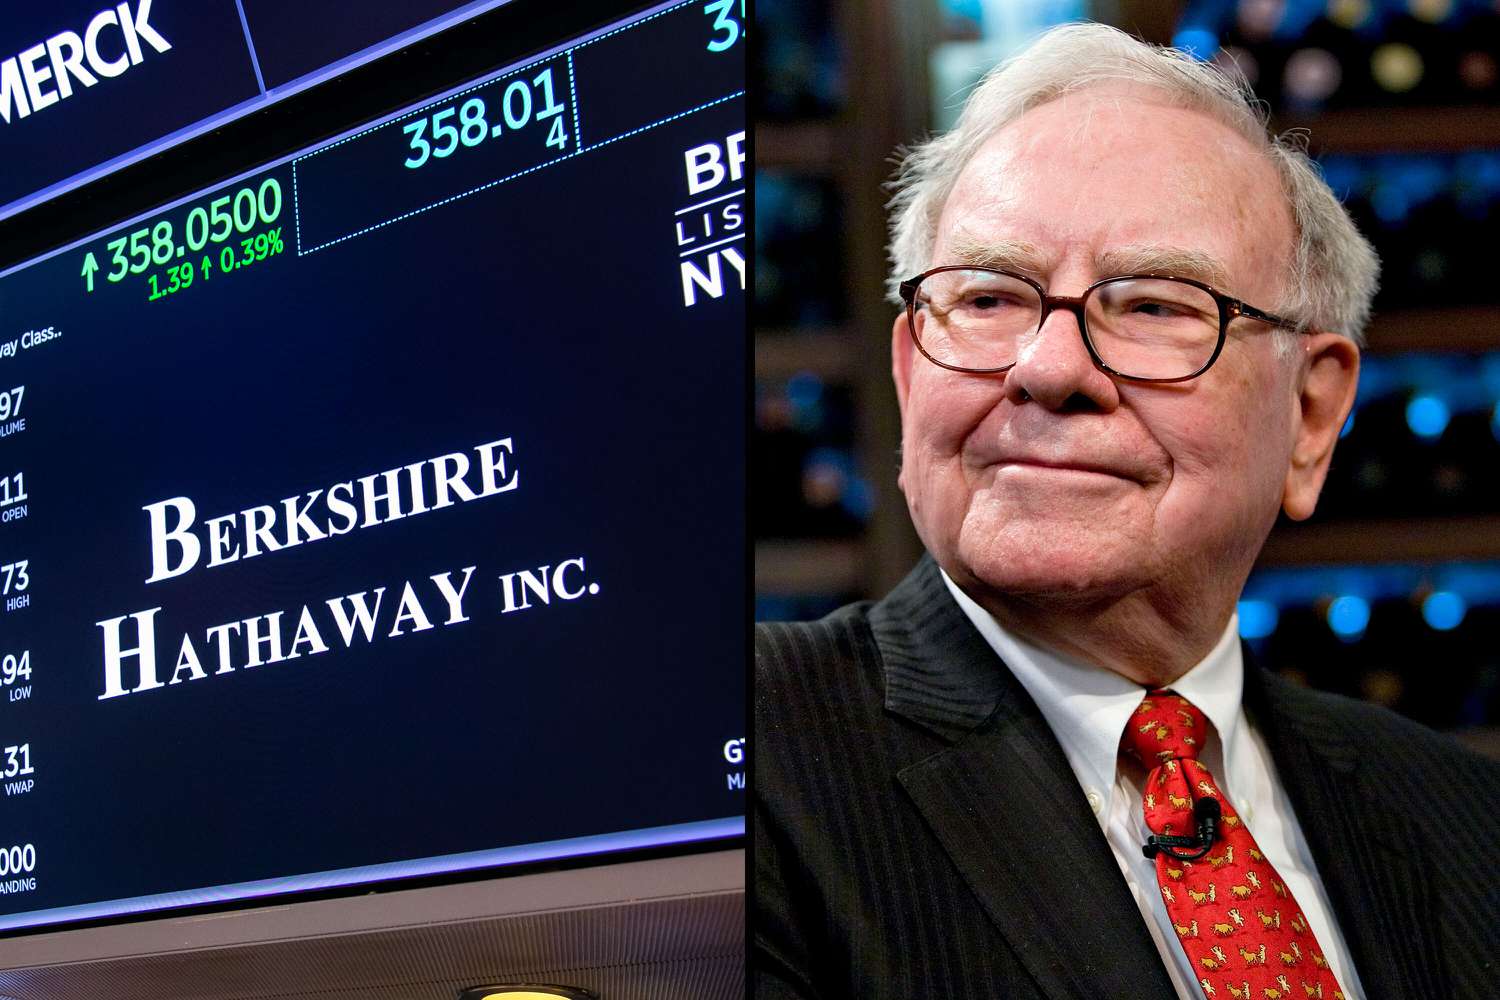 What You Need To Know Ahead of Warren Buffett's Berkshire Hathaway Annual Meeting